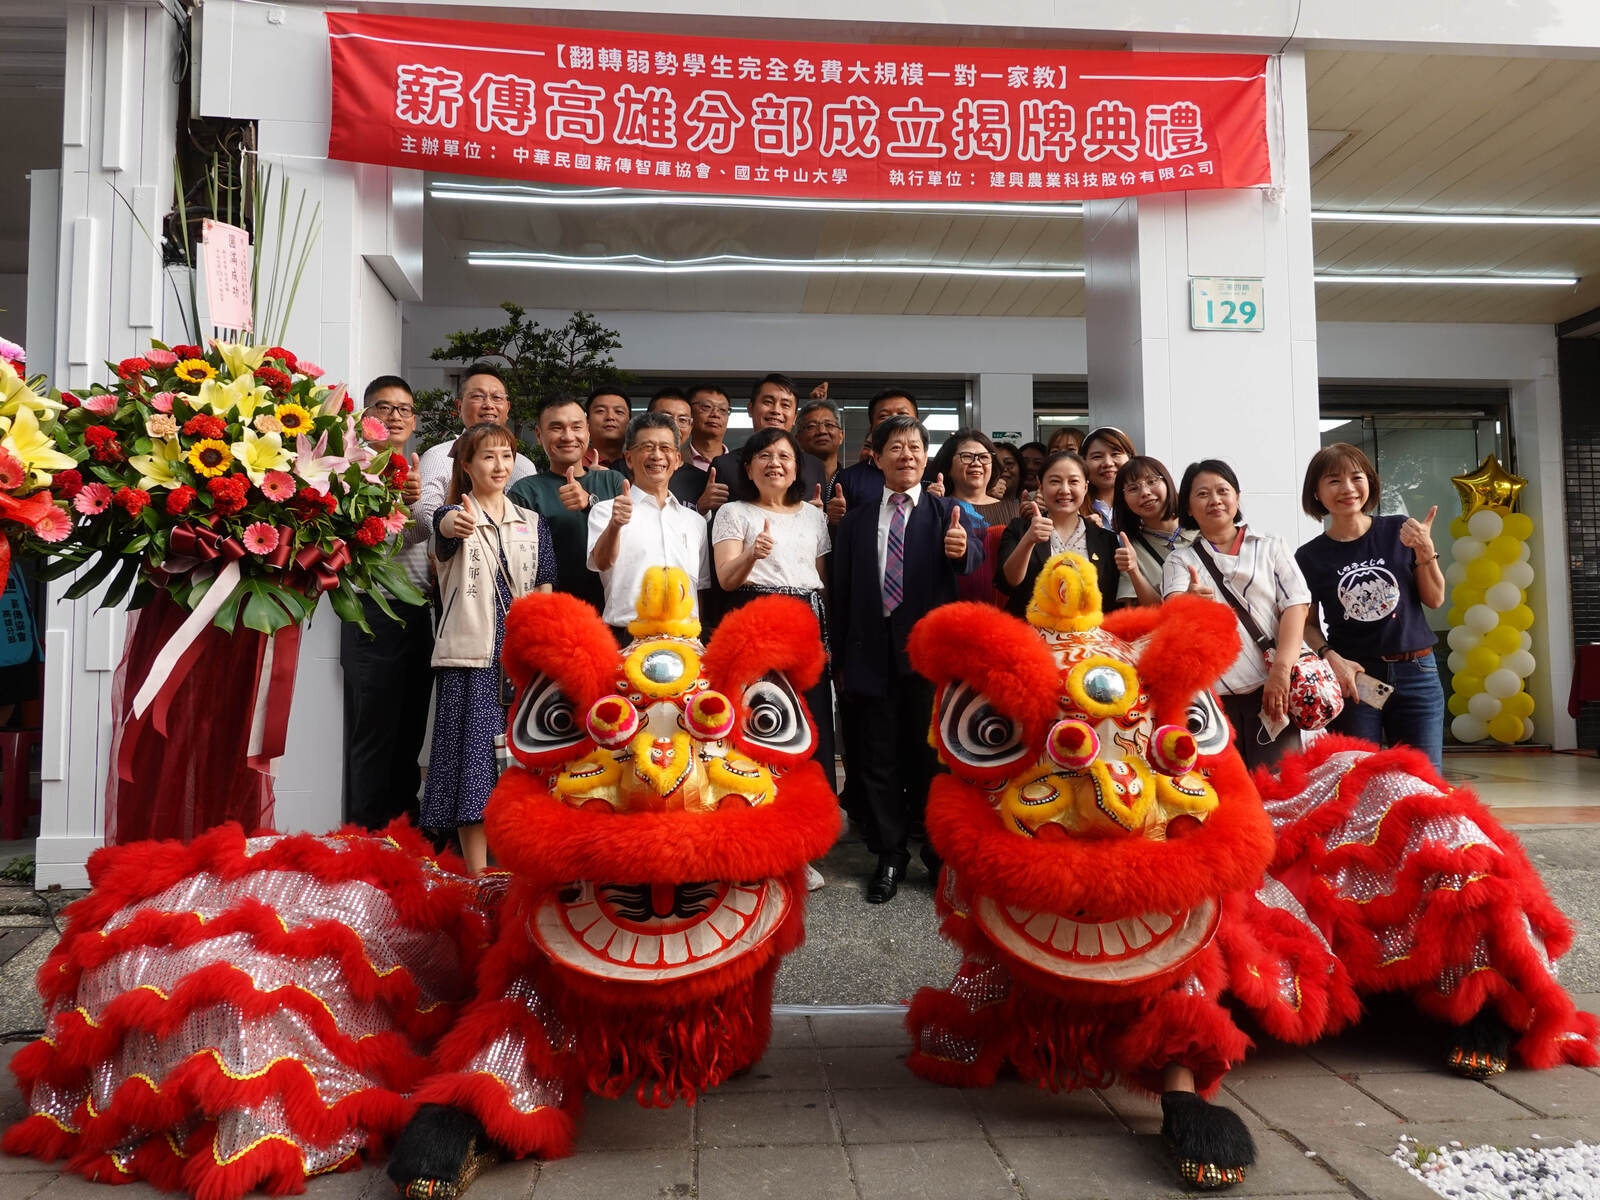 To break the intergenerational duplication of disadvantaged families, NSYSU collaborated with Xin Chuan Used Bookstore at Minxiong Township in Chiayi County and held the Xin Chuan Kaohsiung Branch Unveiling Ceremony